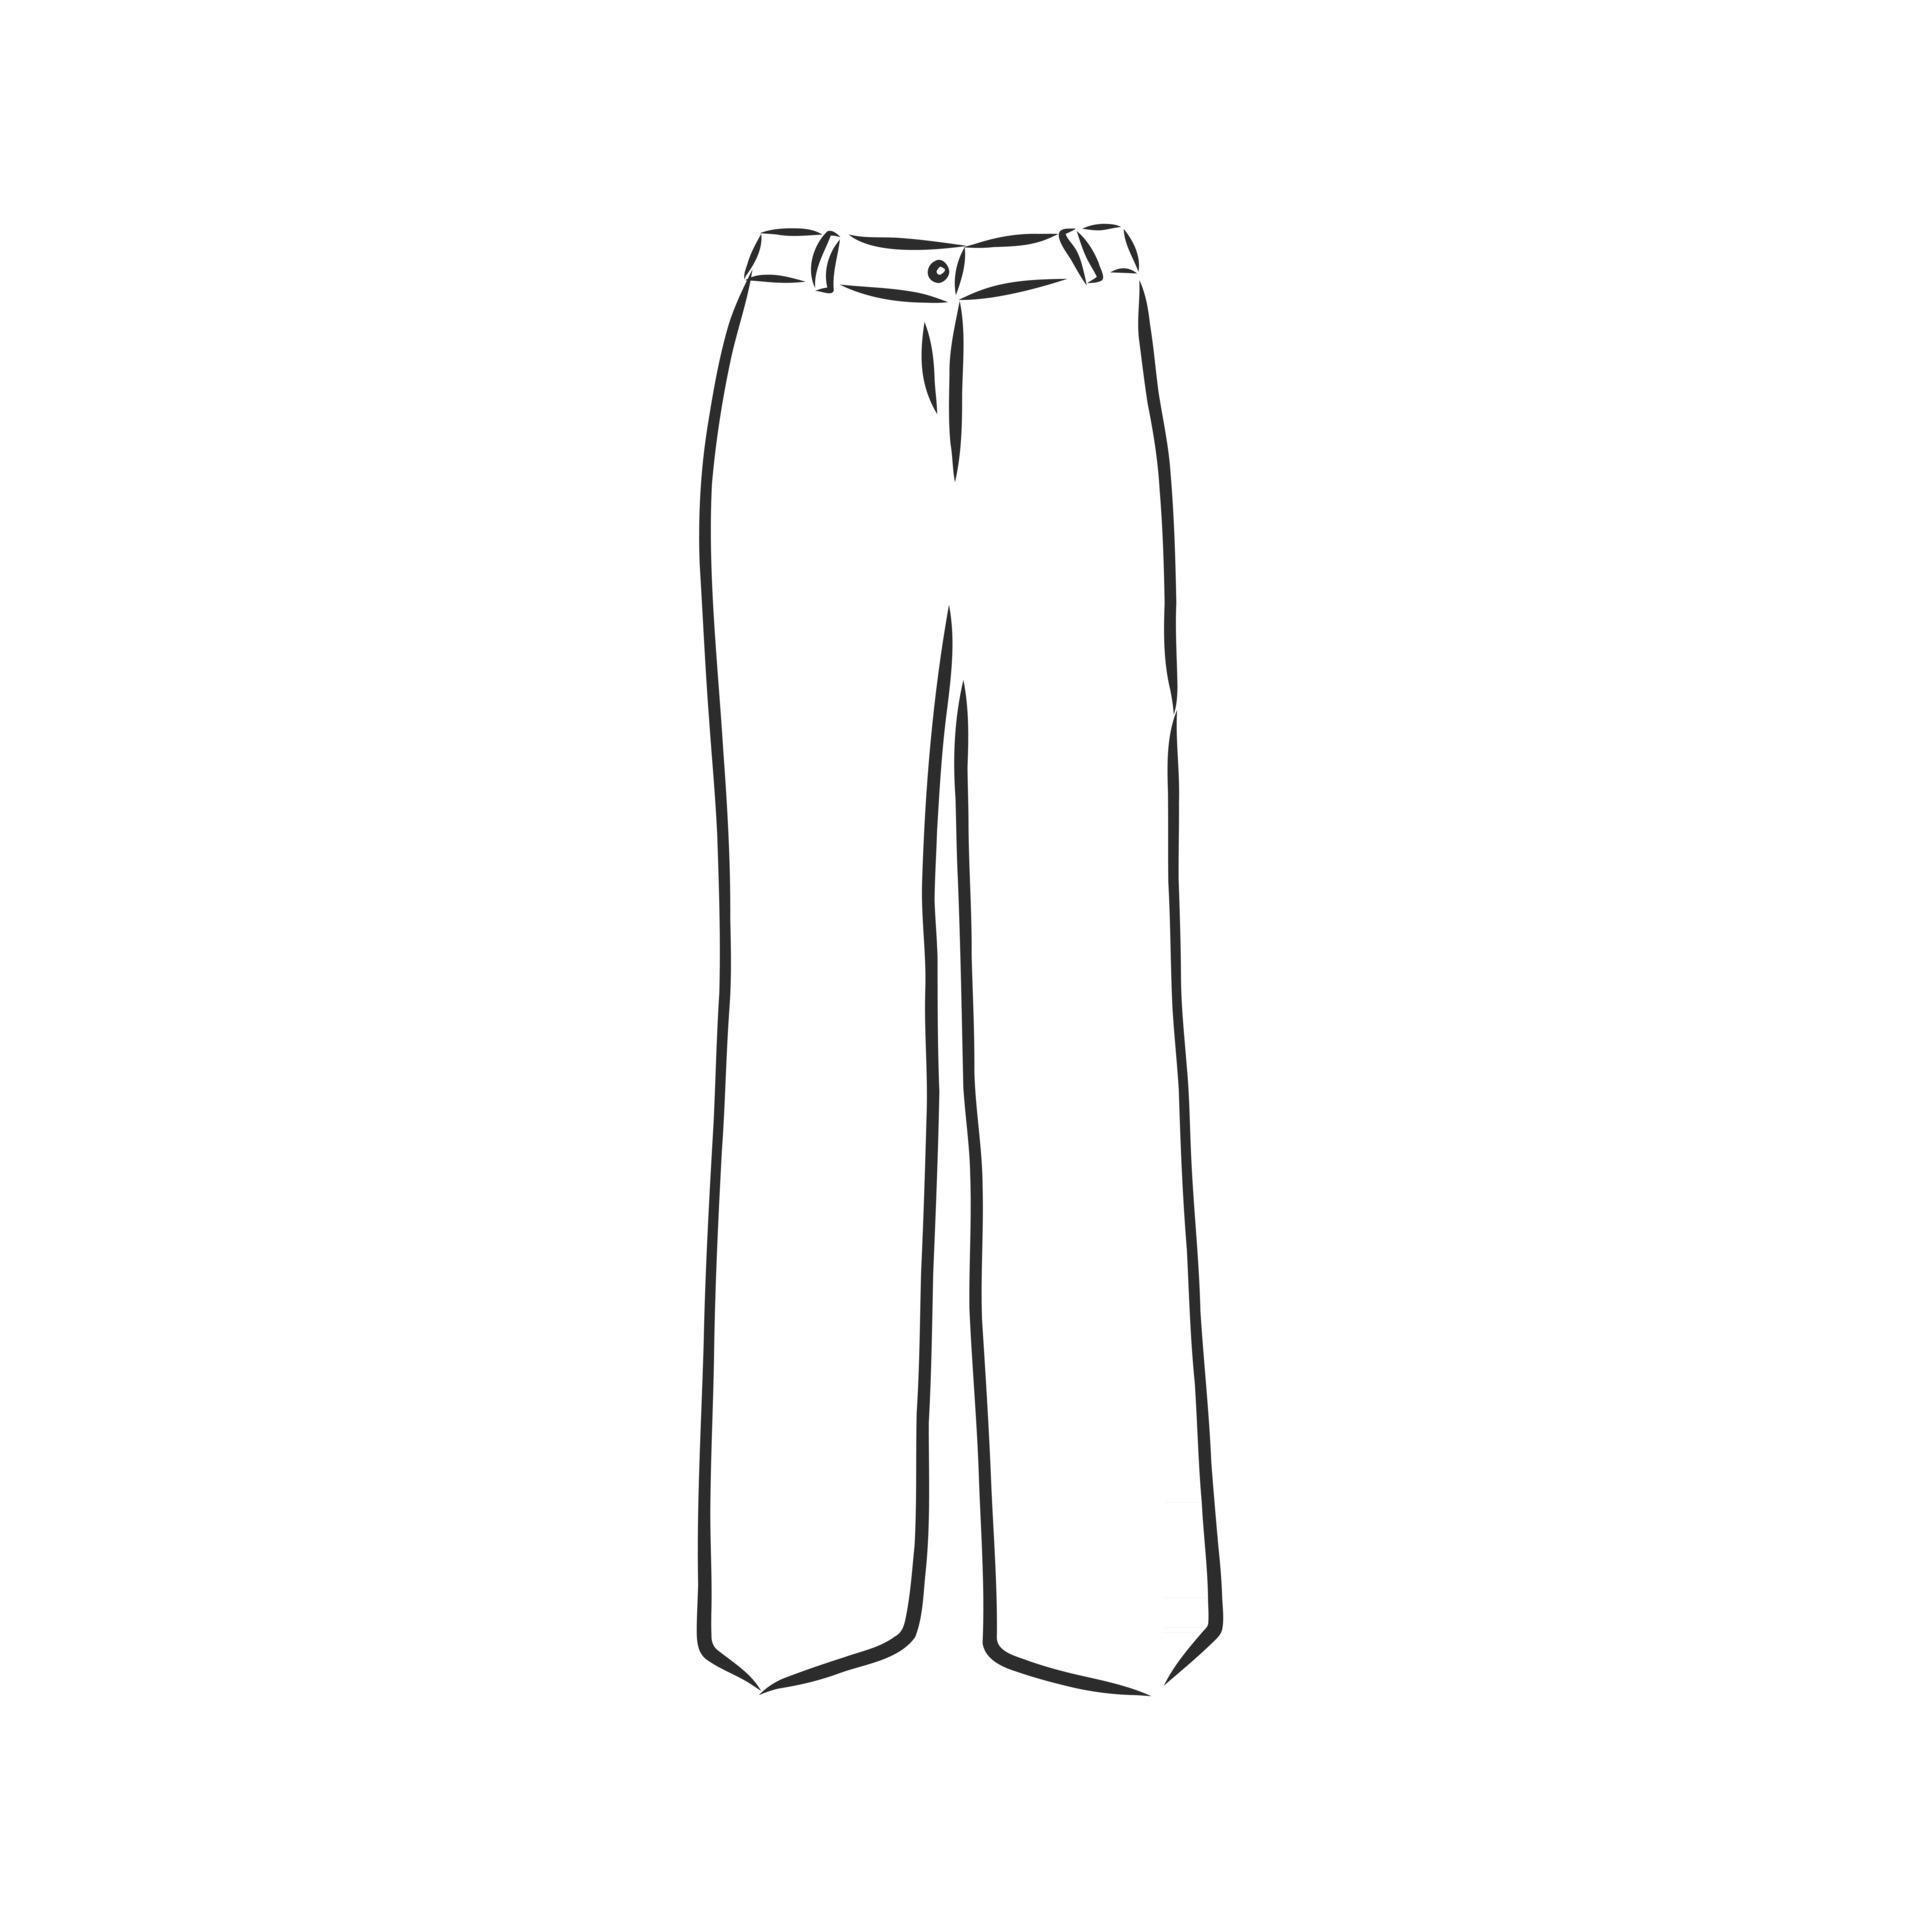 technical sketch of trousers classic trousers vector sketch